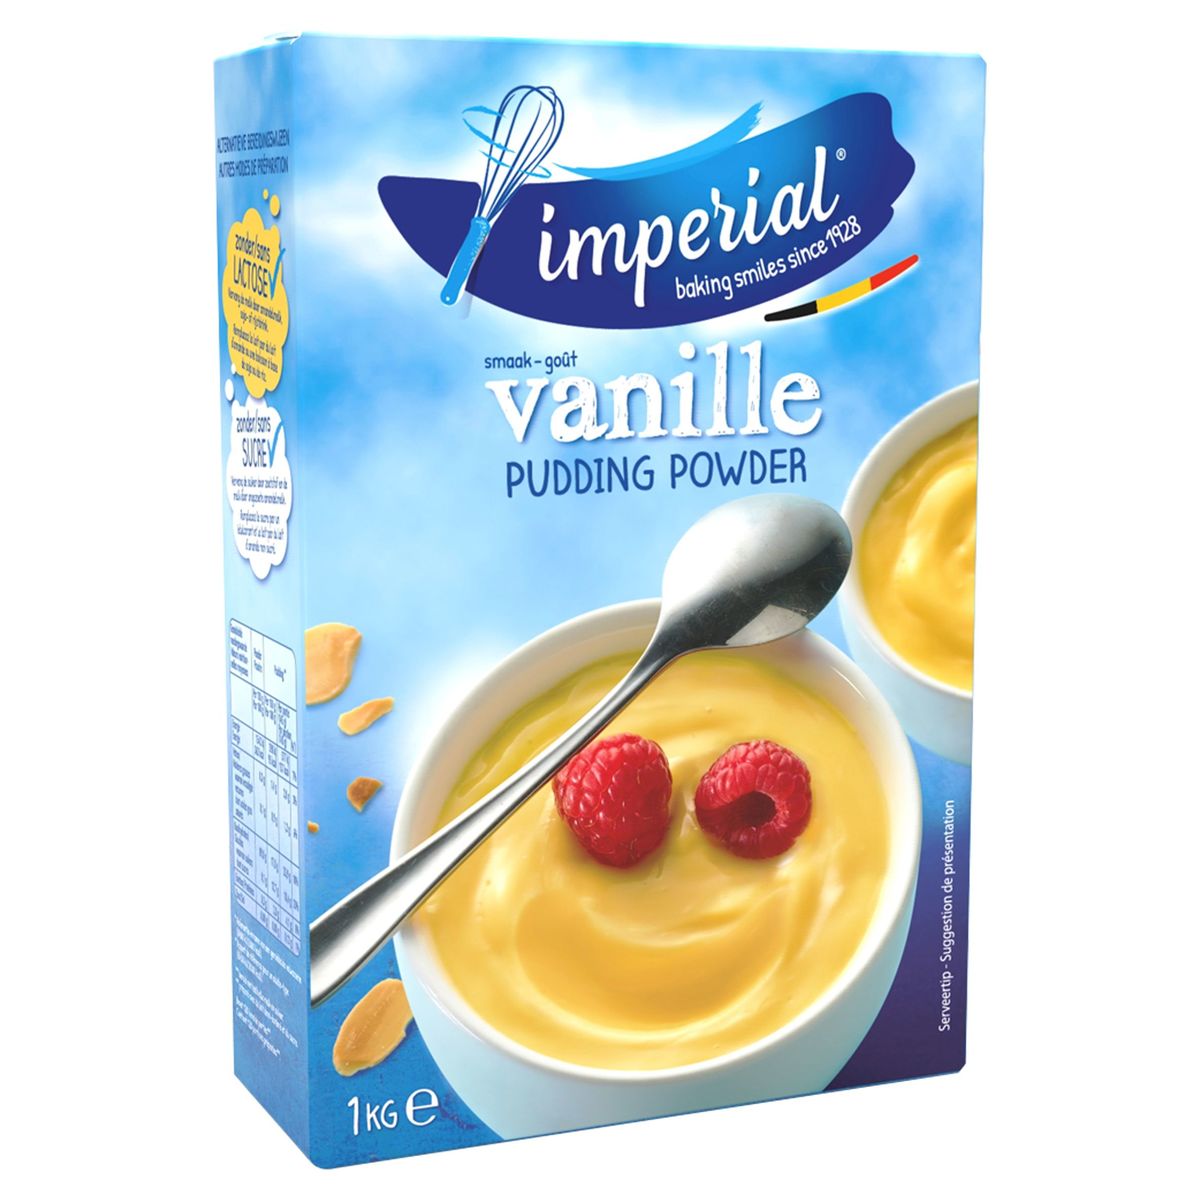 Imperial Pudding Powder Vanille 1 kg